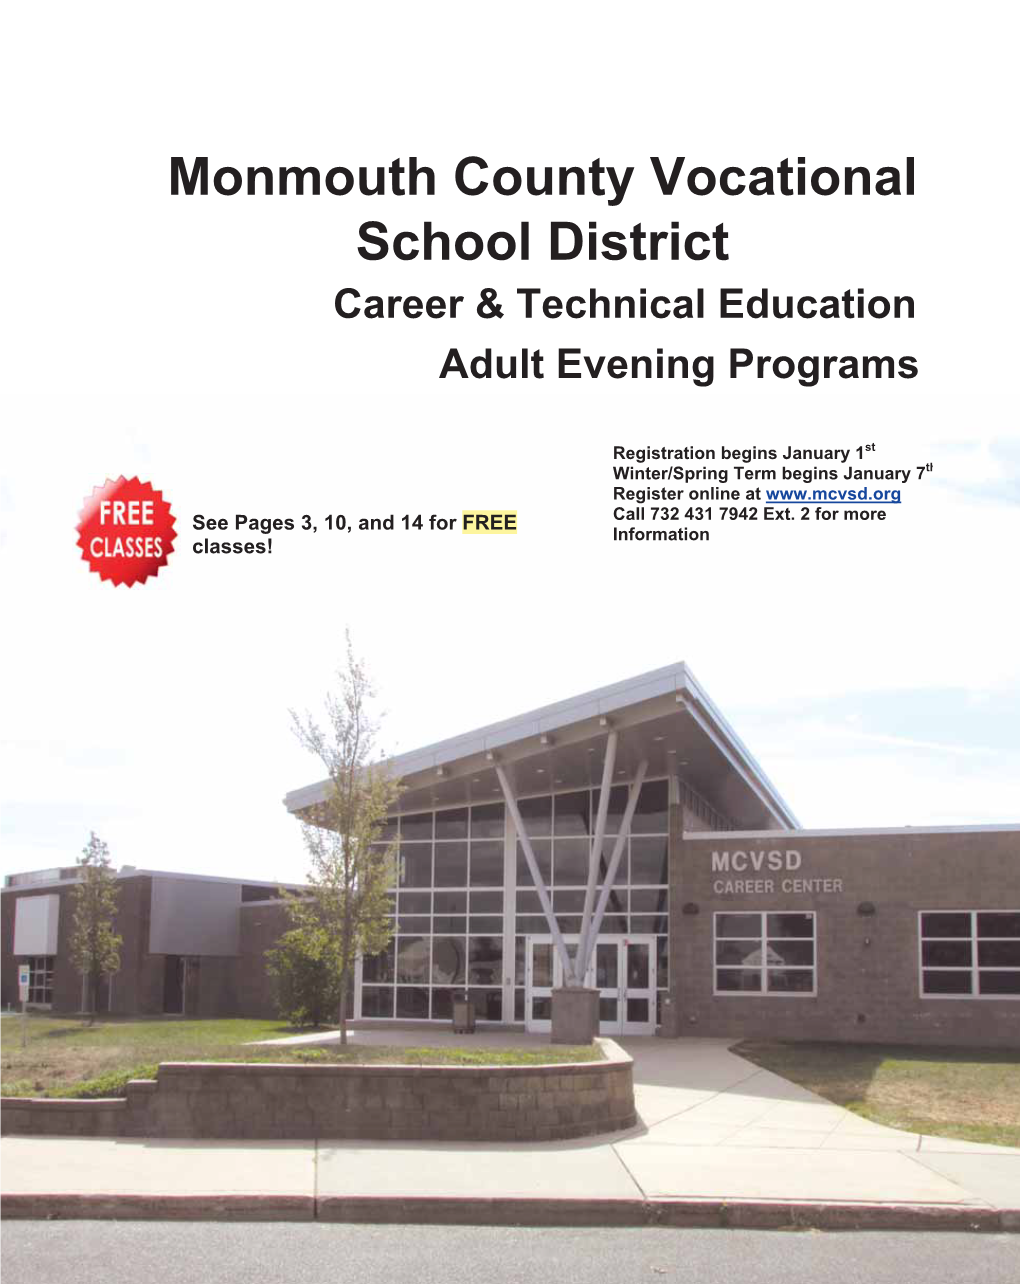 Monmouth County Vocational School District Career & Technical